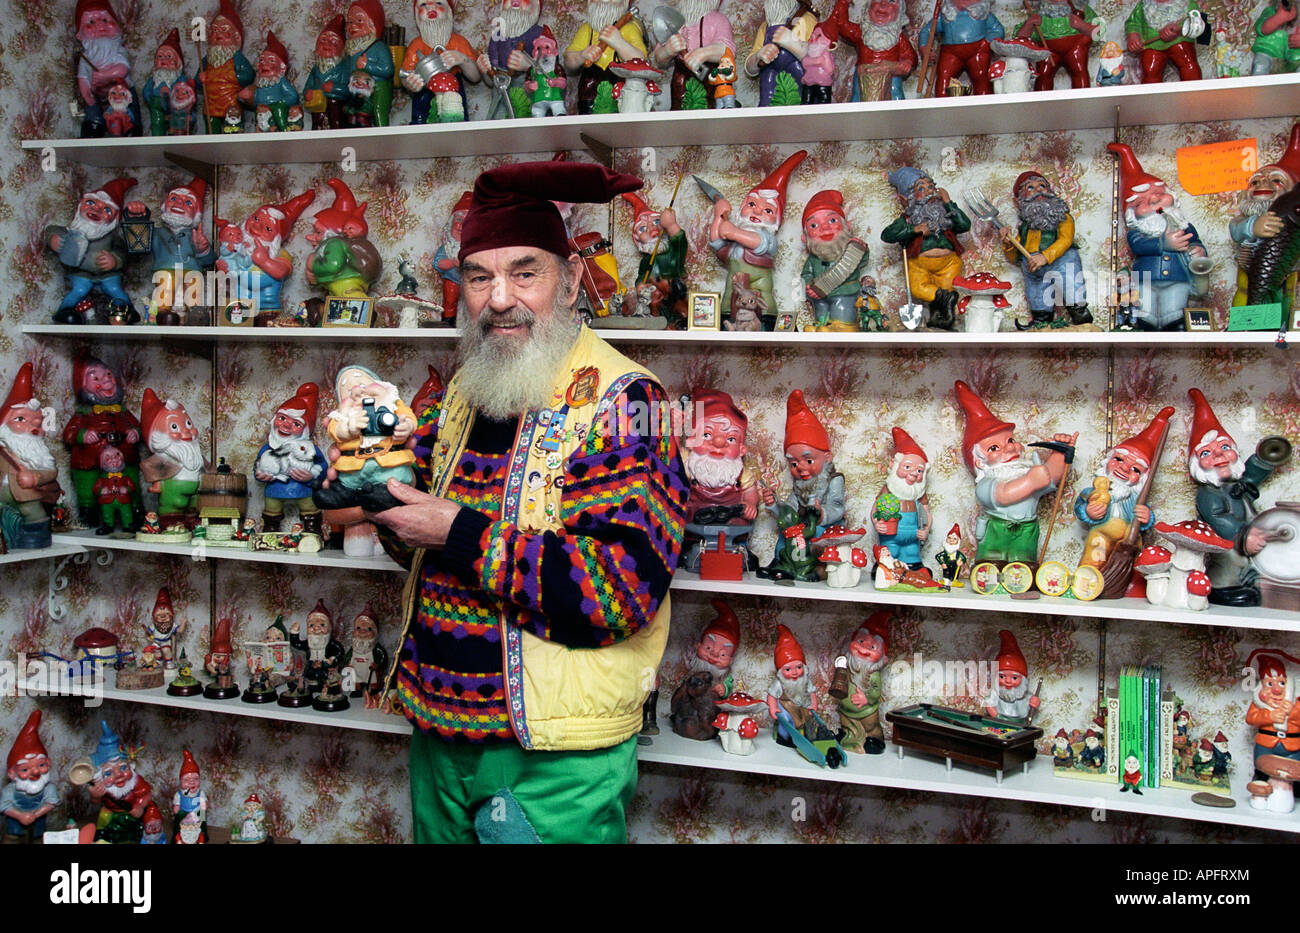 Man posing and showing his collection of garden gnomes Stock Photo